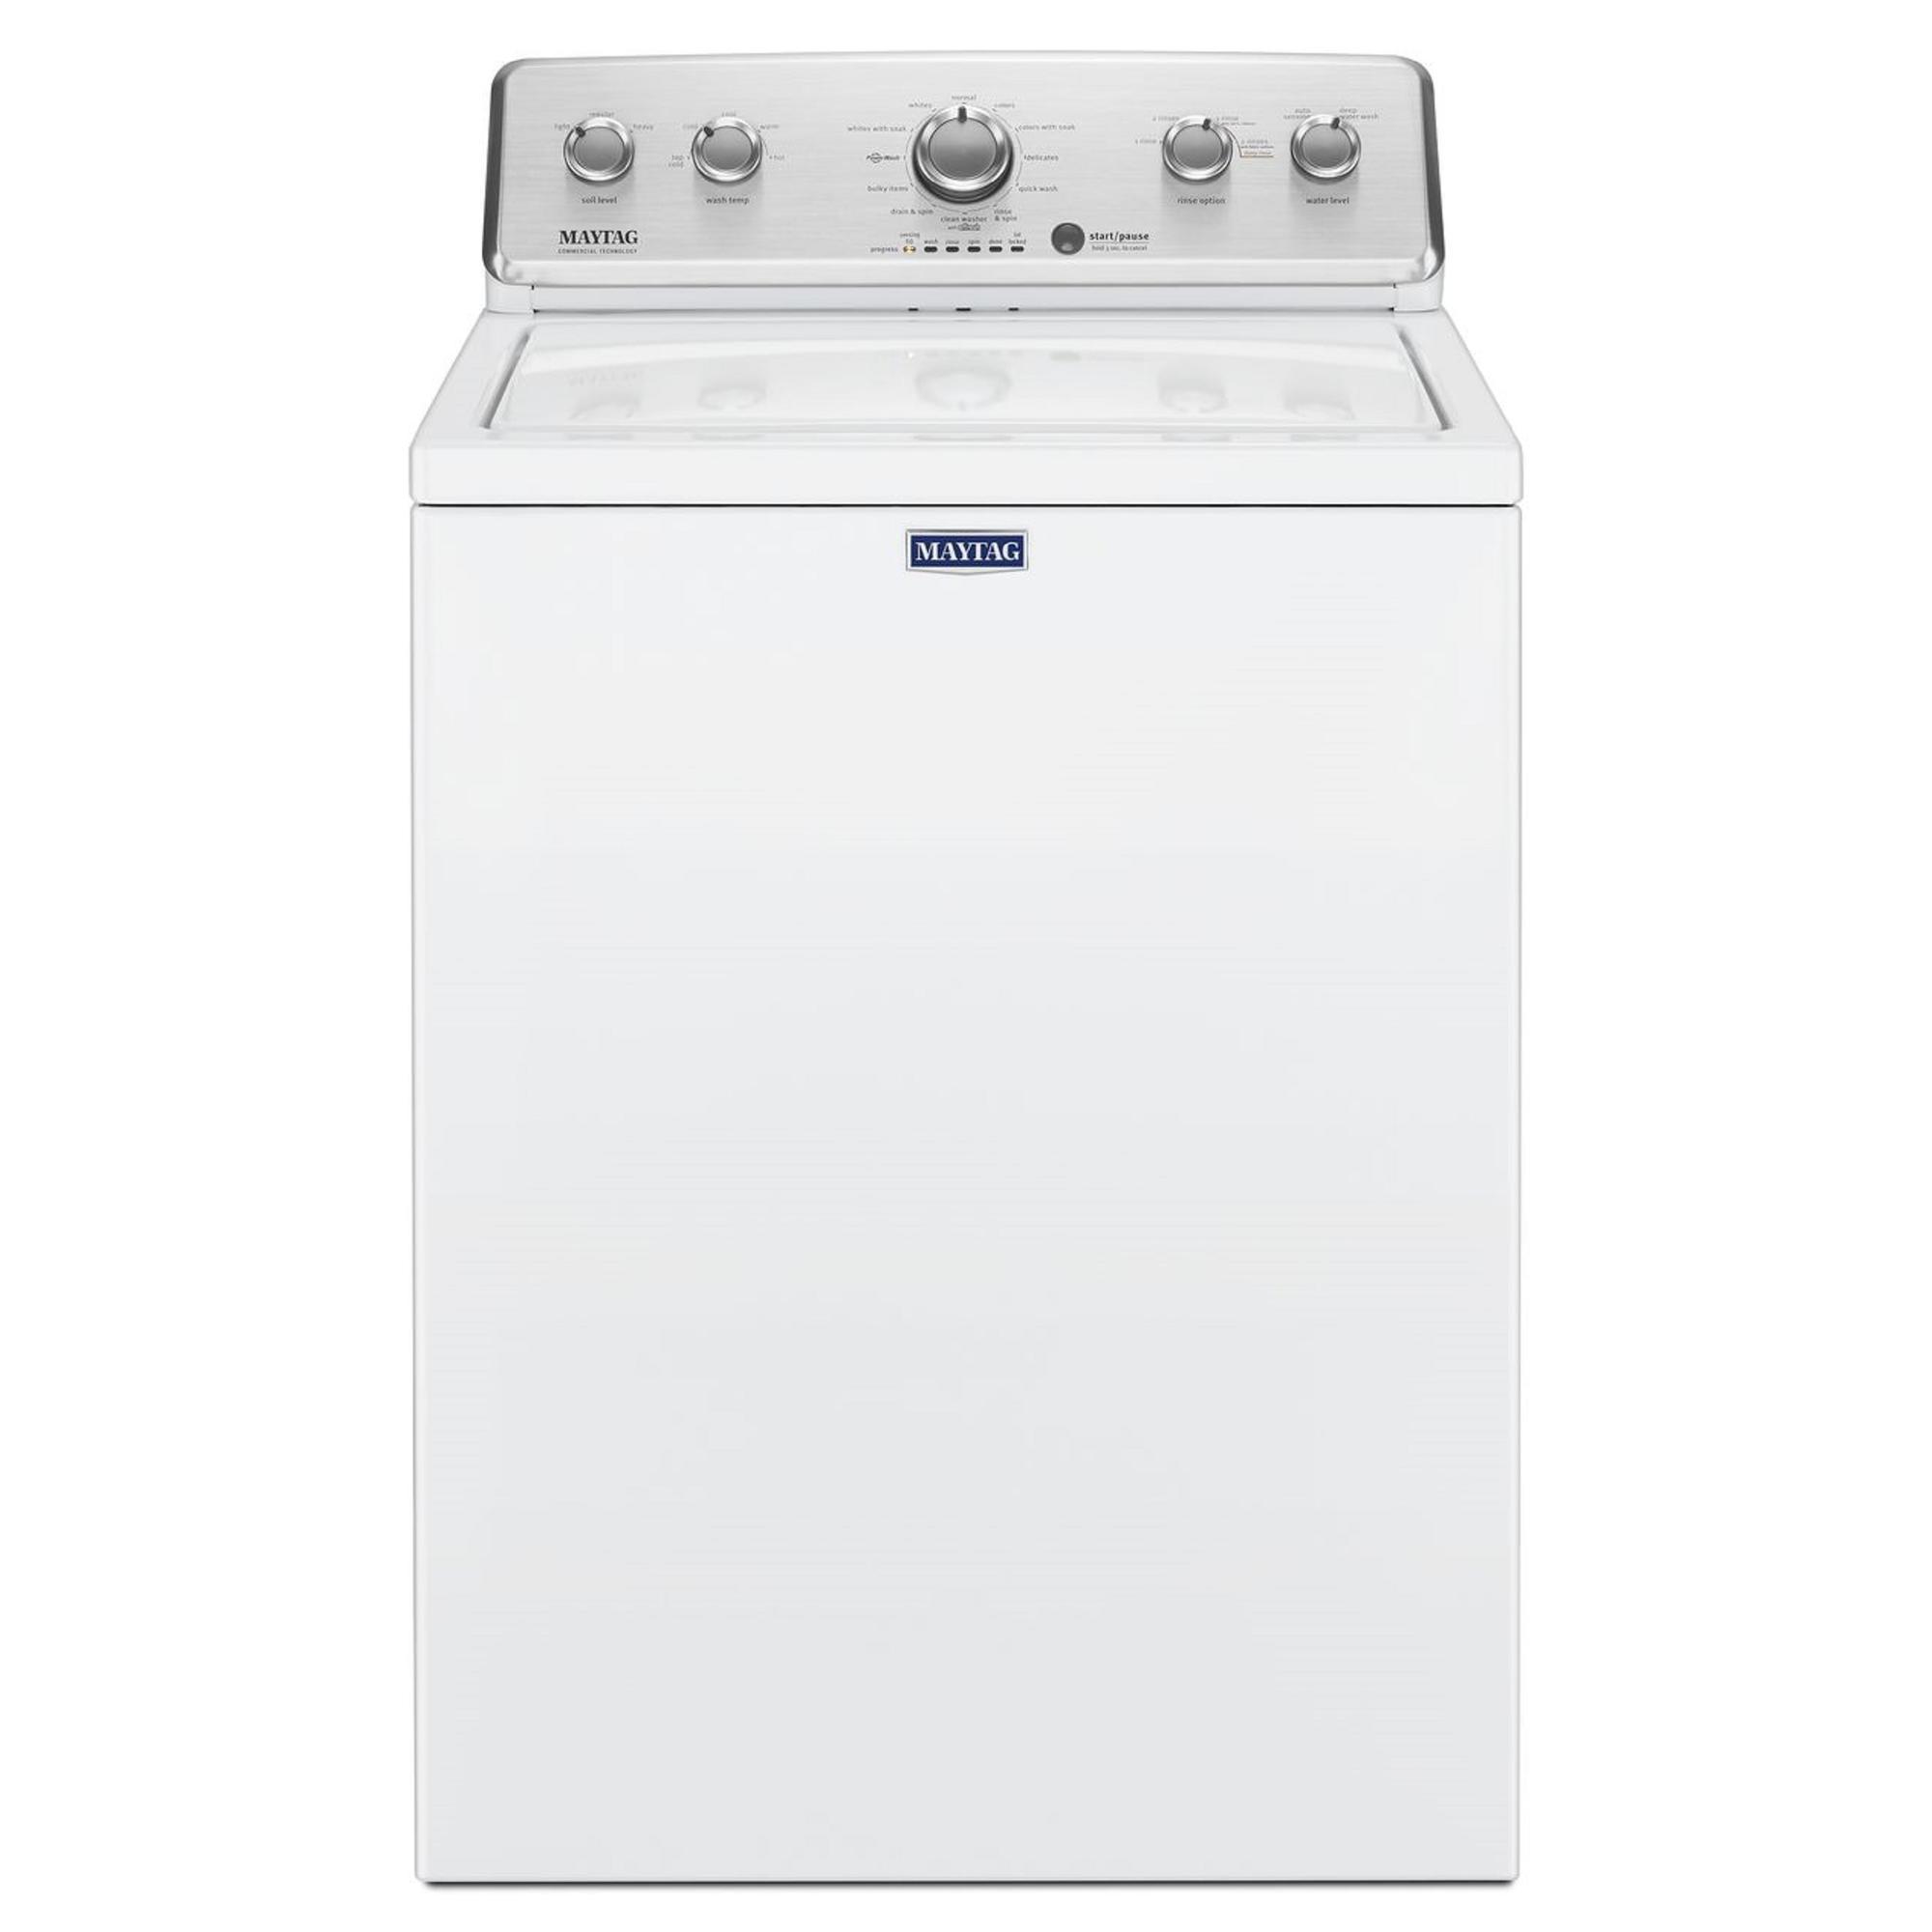 Maytag MVWC465HW 3.8 Cu. Ft. Large Capacity Top Load Washer with the Deep Fill Option in White